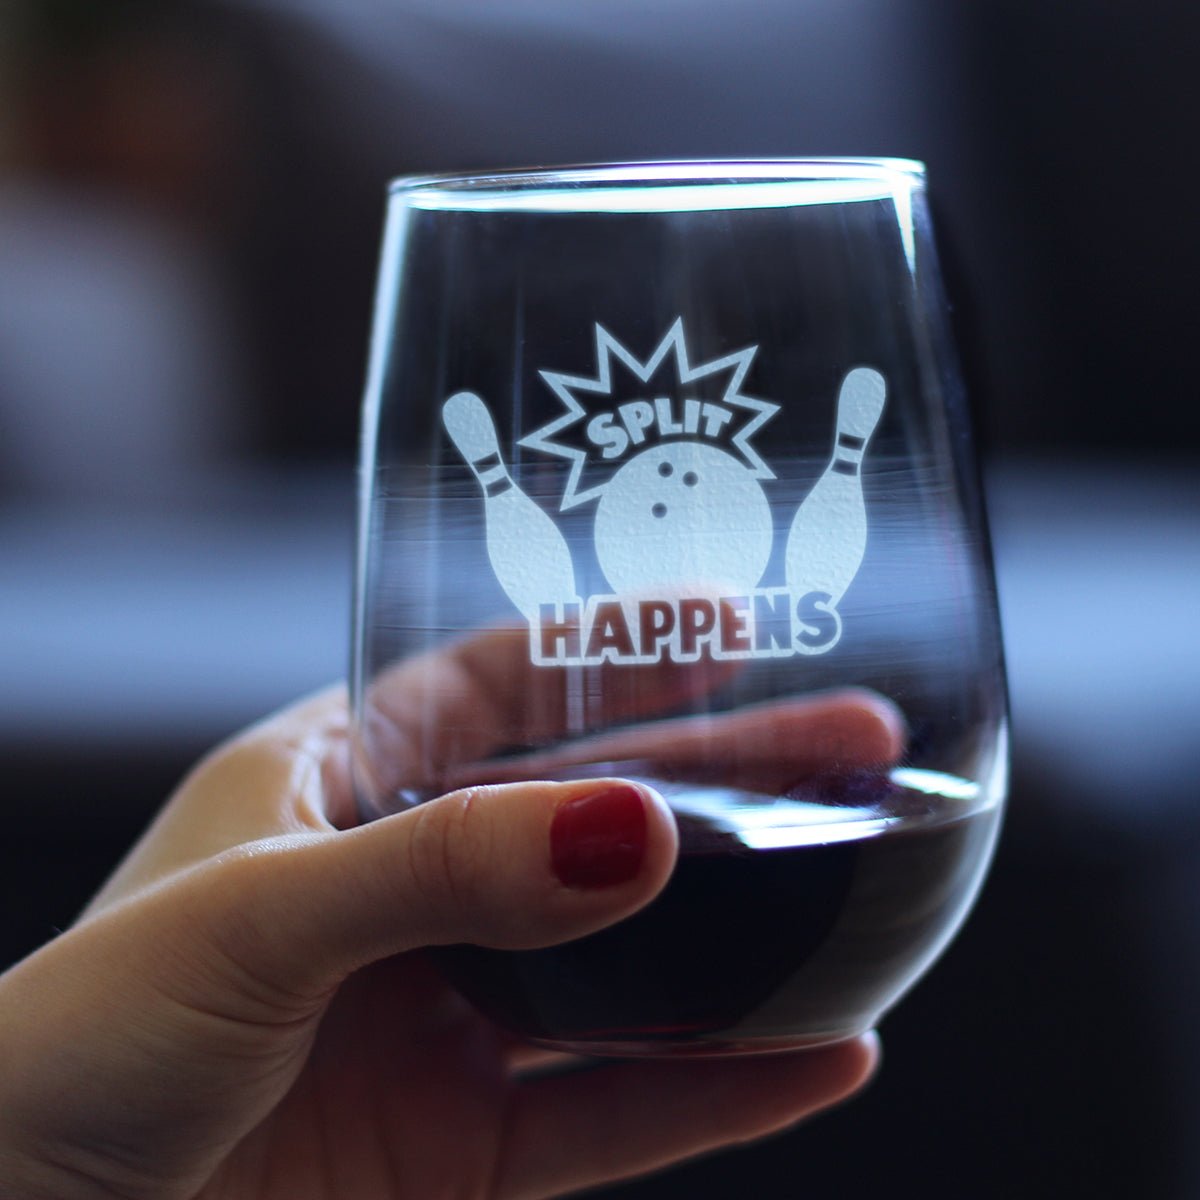 Split Happens - Stemless Wine Glass - Funny Bowling Themed Gifts and Decor for Bowlers - Large 17 Oz Glass